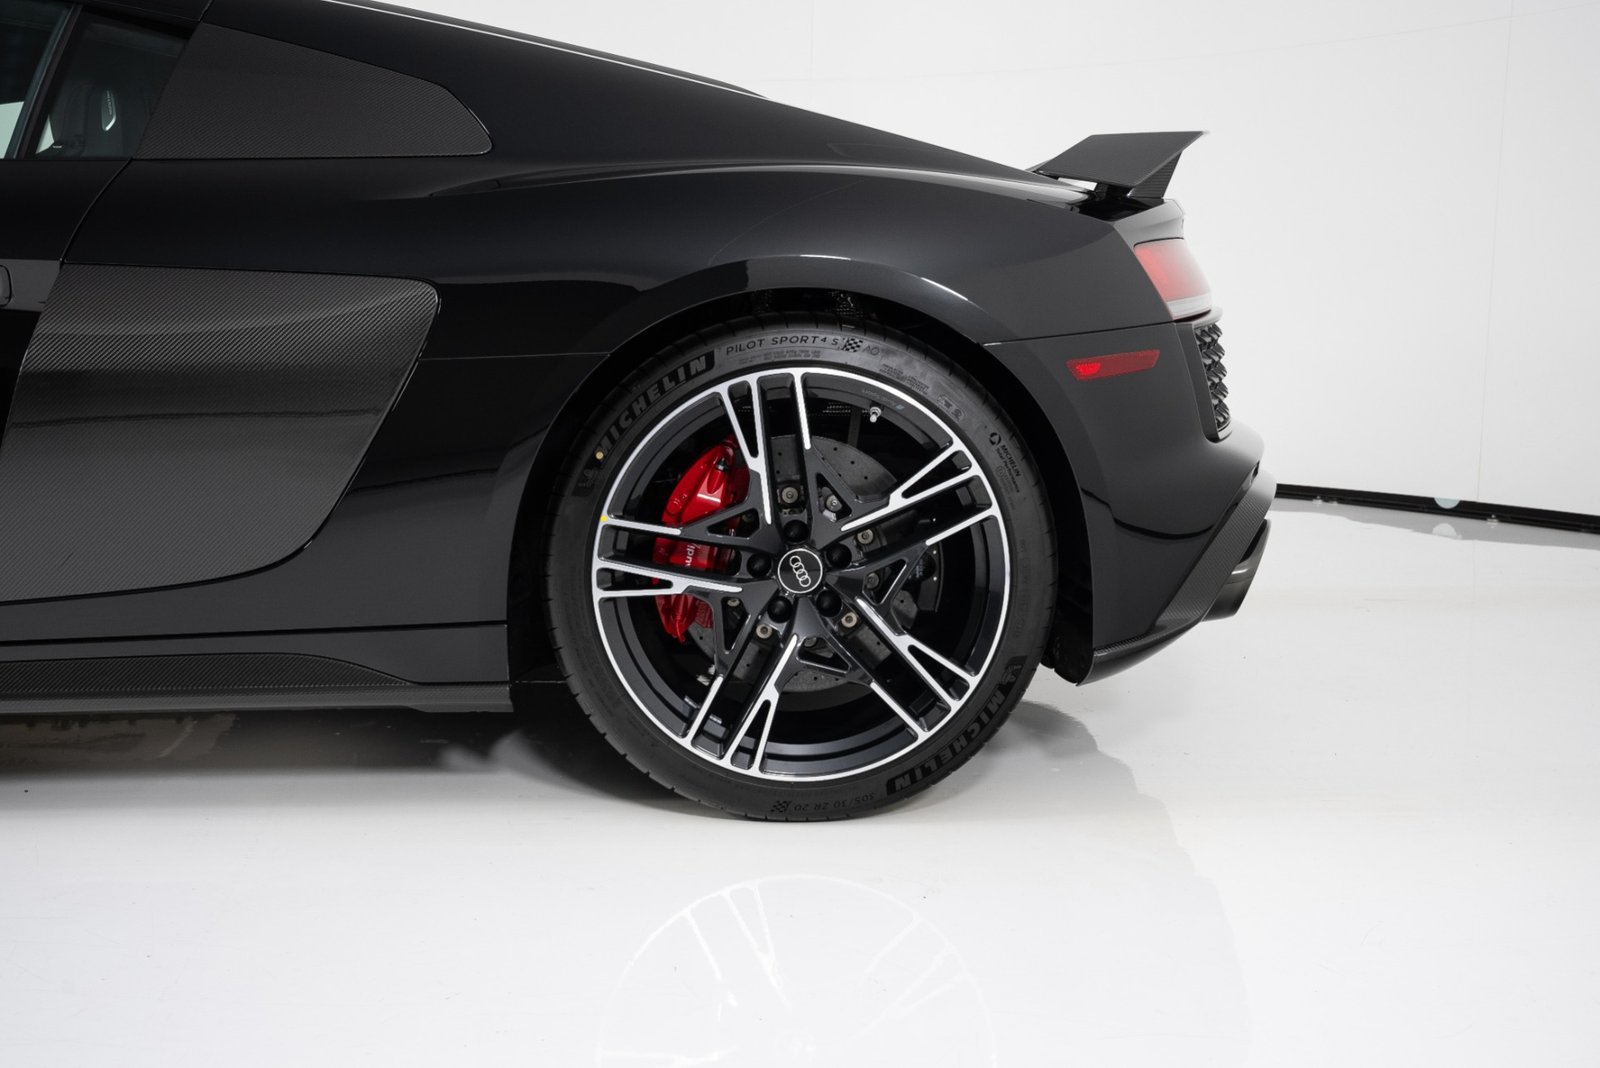 New 2023 AUDI R8 COUPE V10 PERFORMANCE ALL WHEEL DRIVE (2)